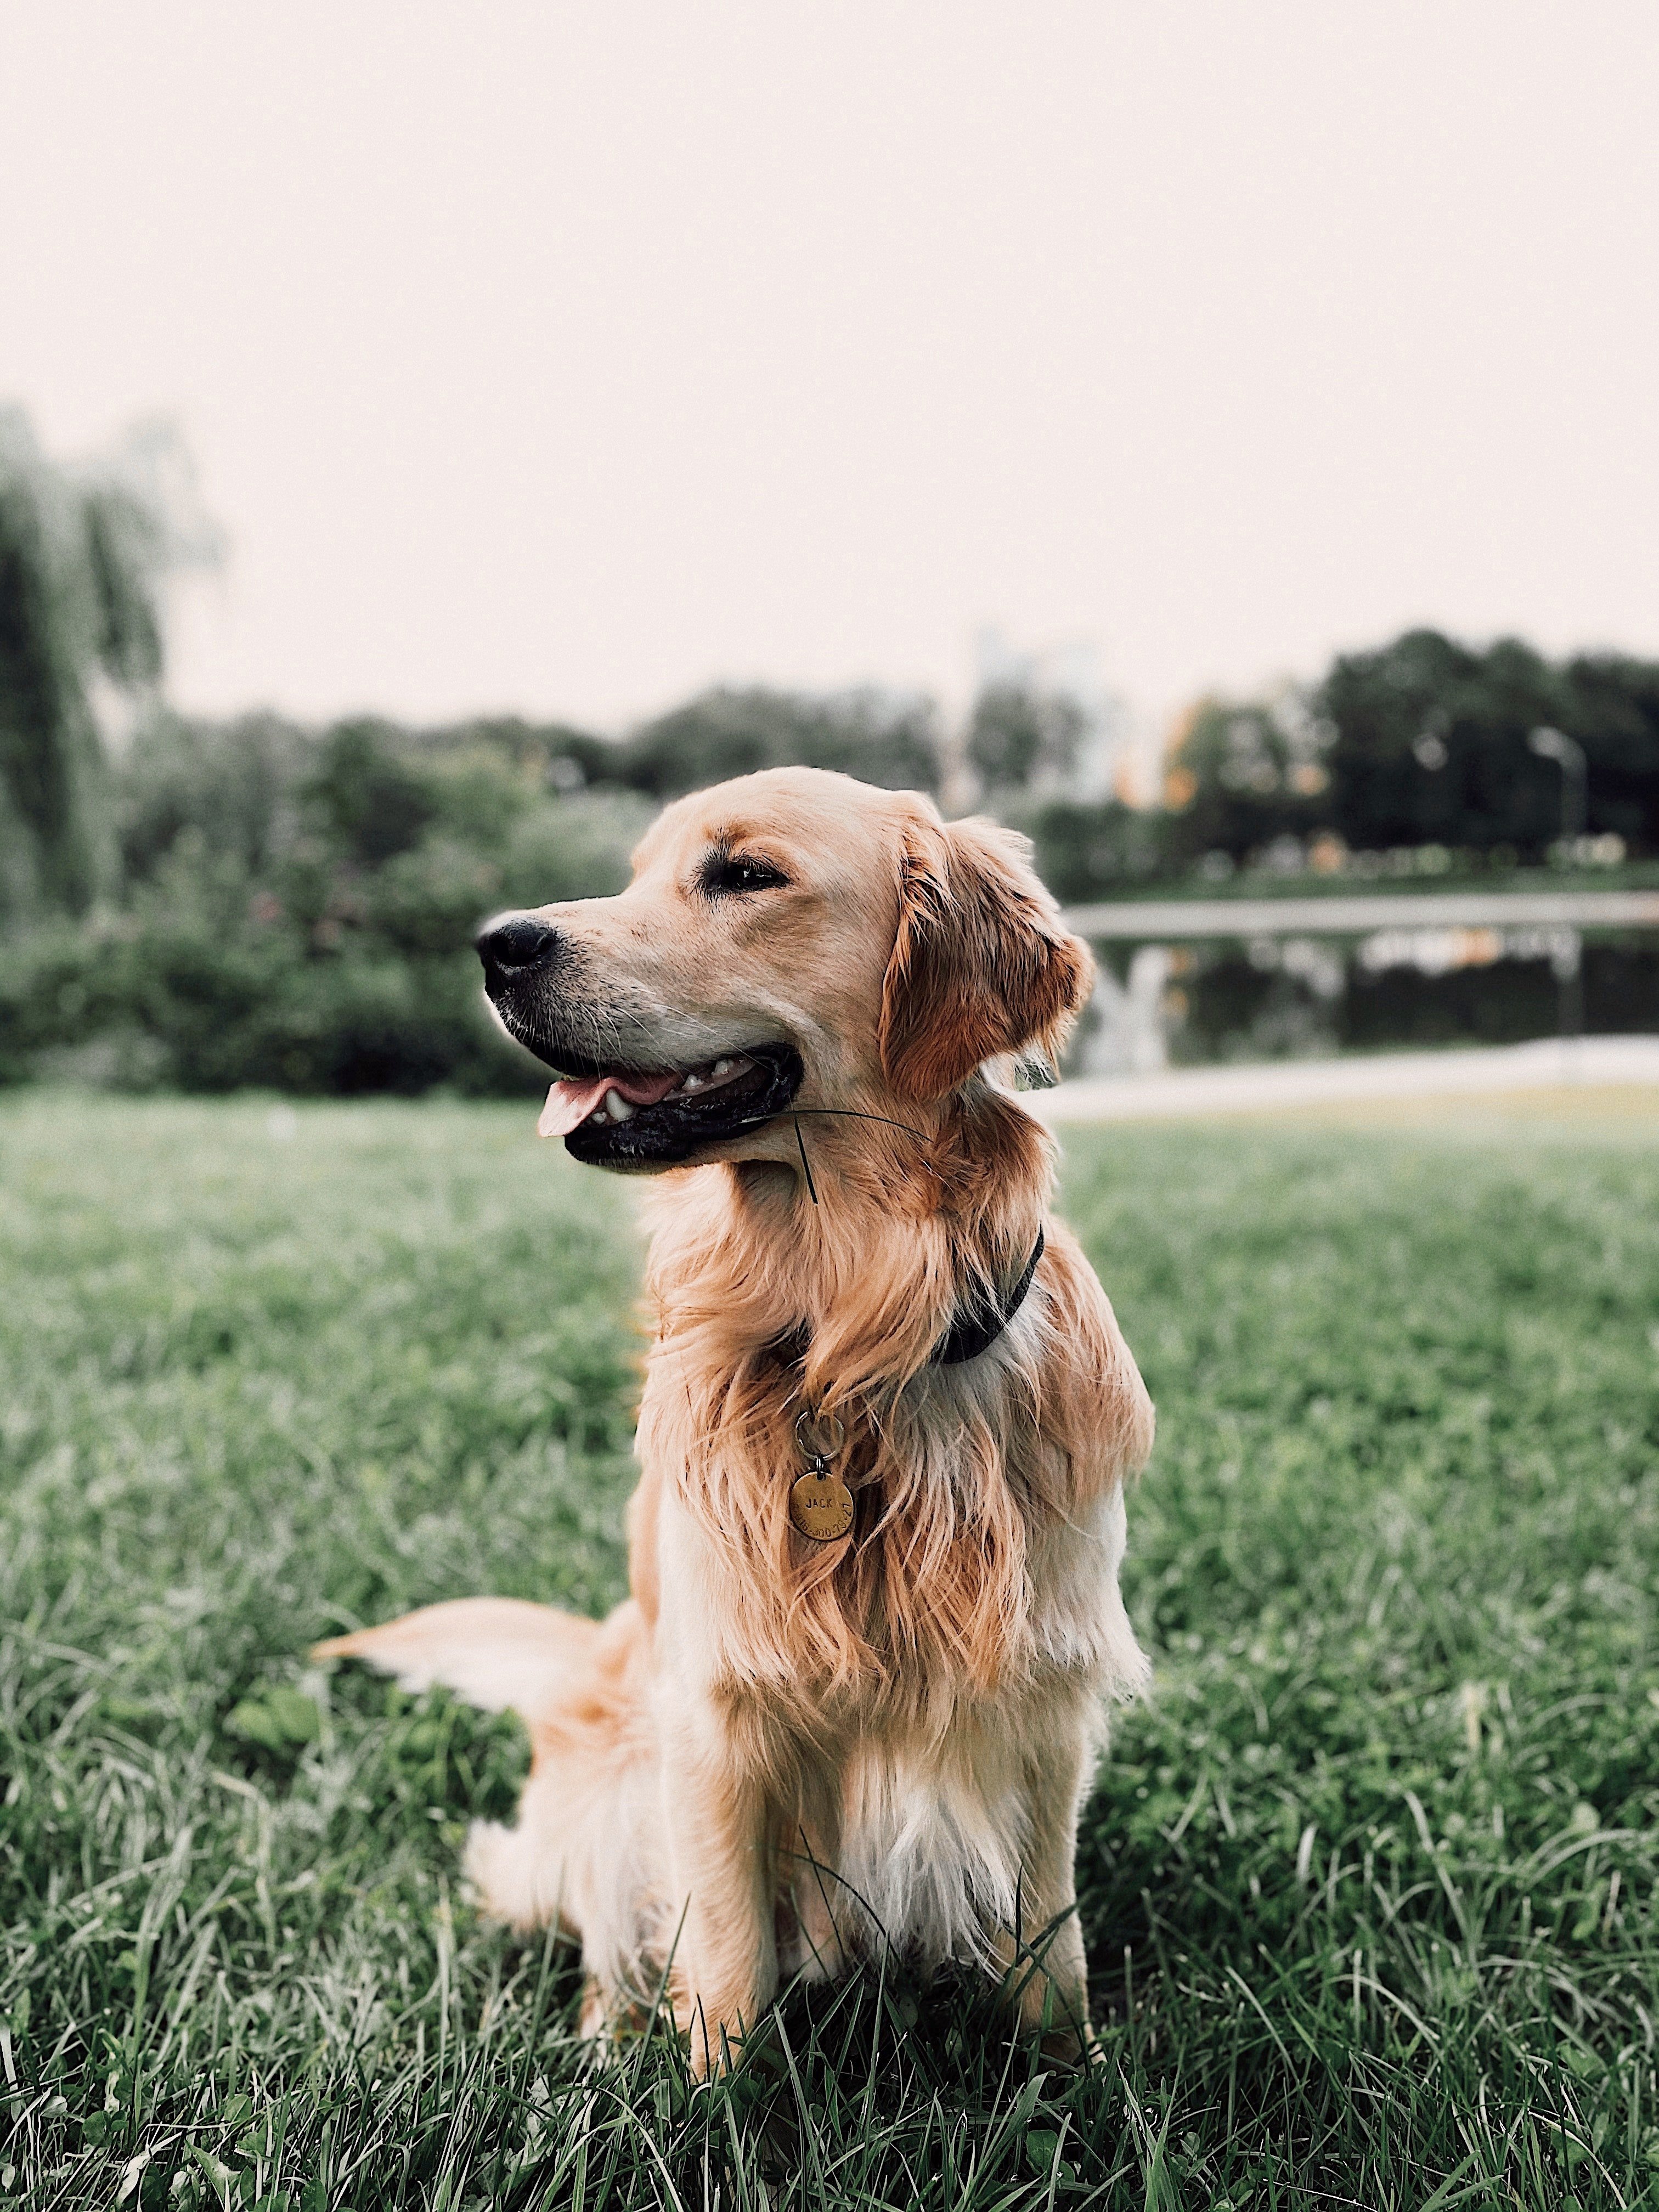 Pictured - A golden retriever on a grassy lawn | Source: Pexels 